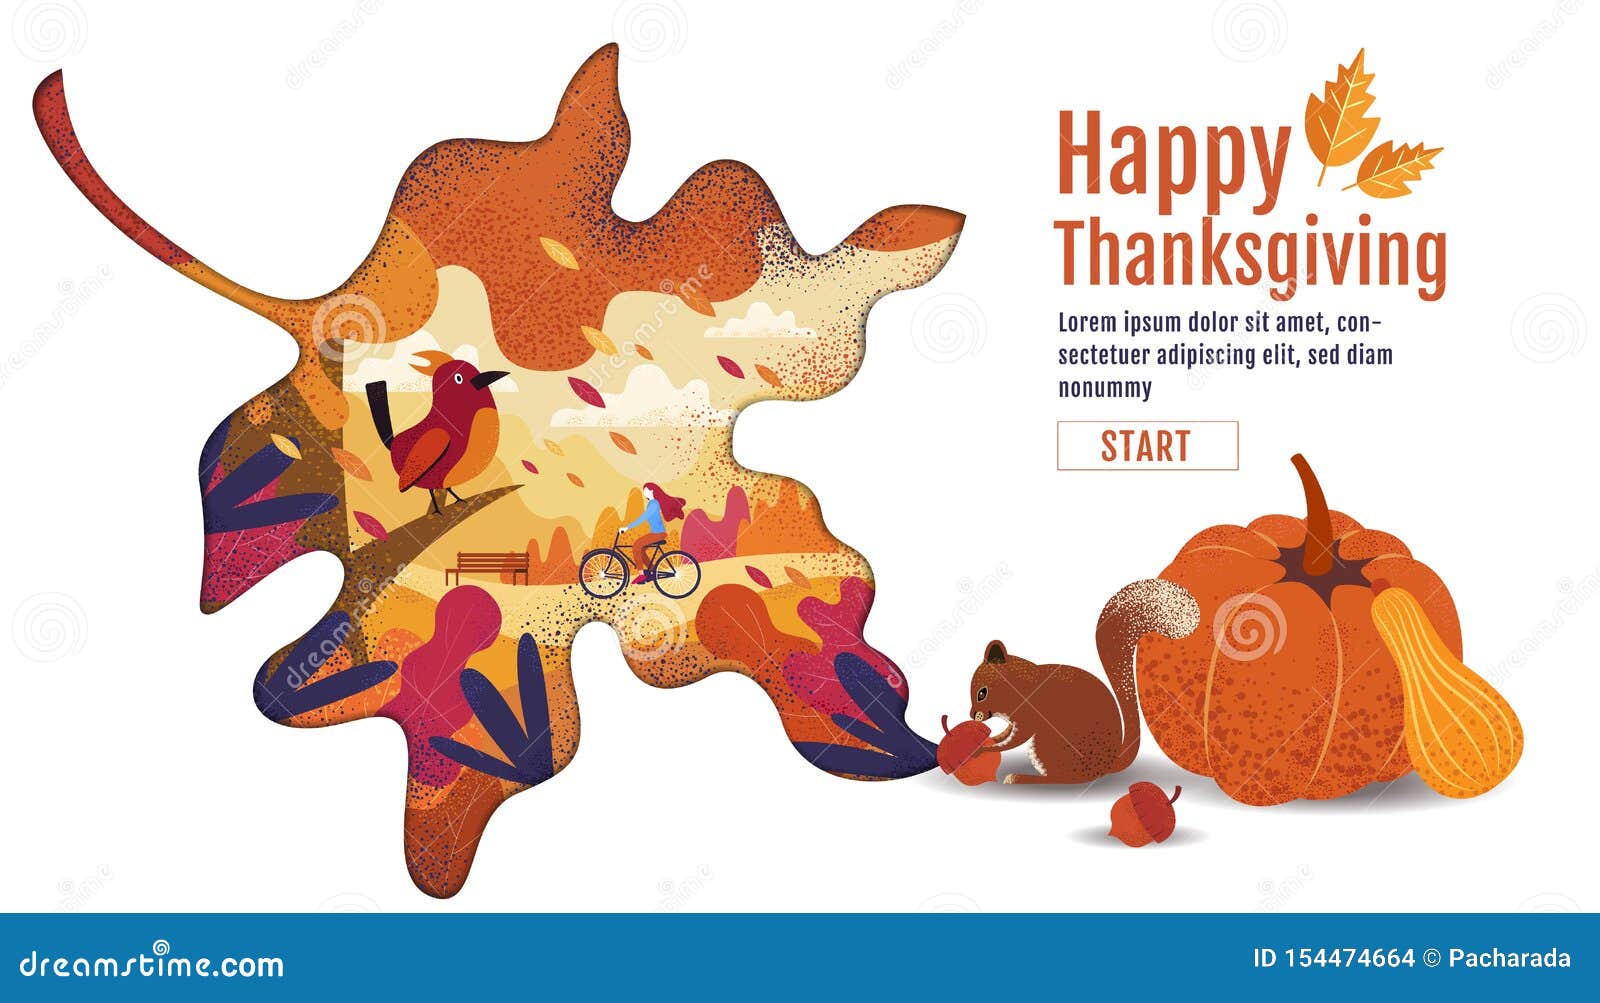 Get Happy Fall Banner Svg Images